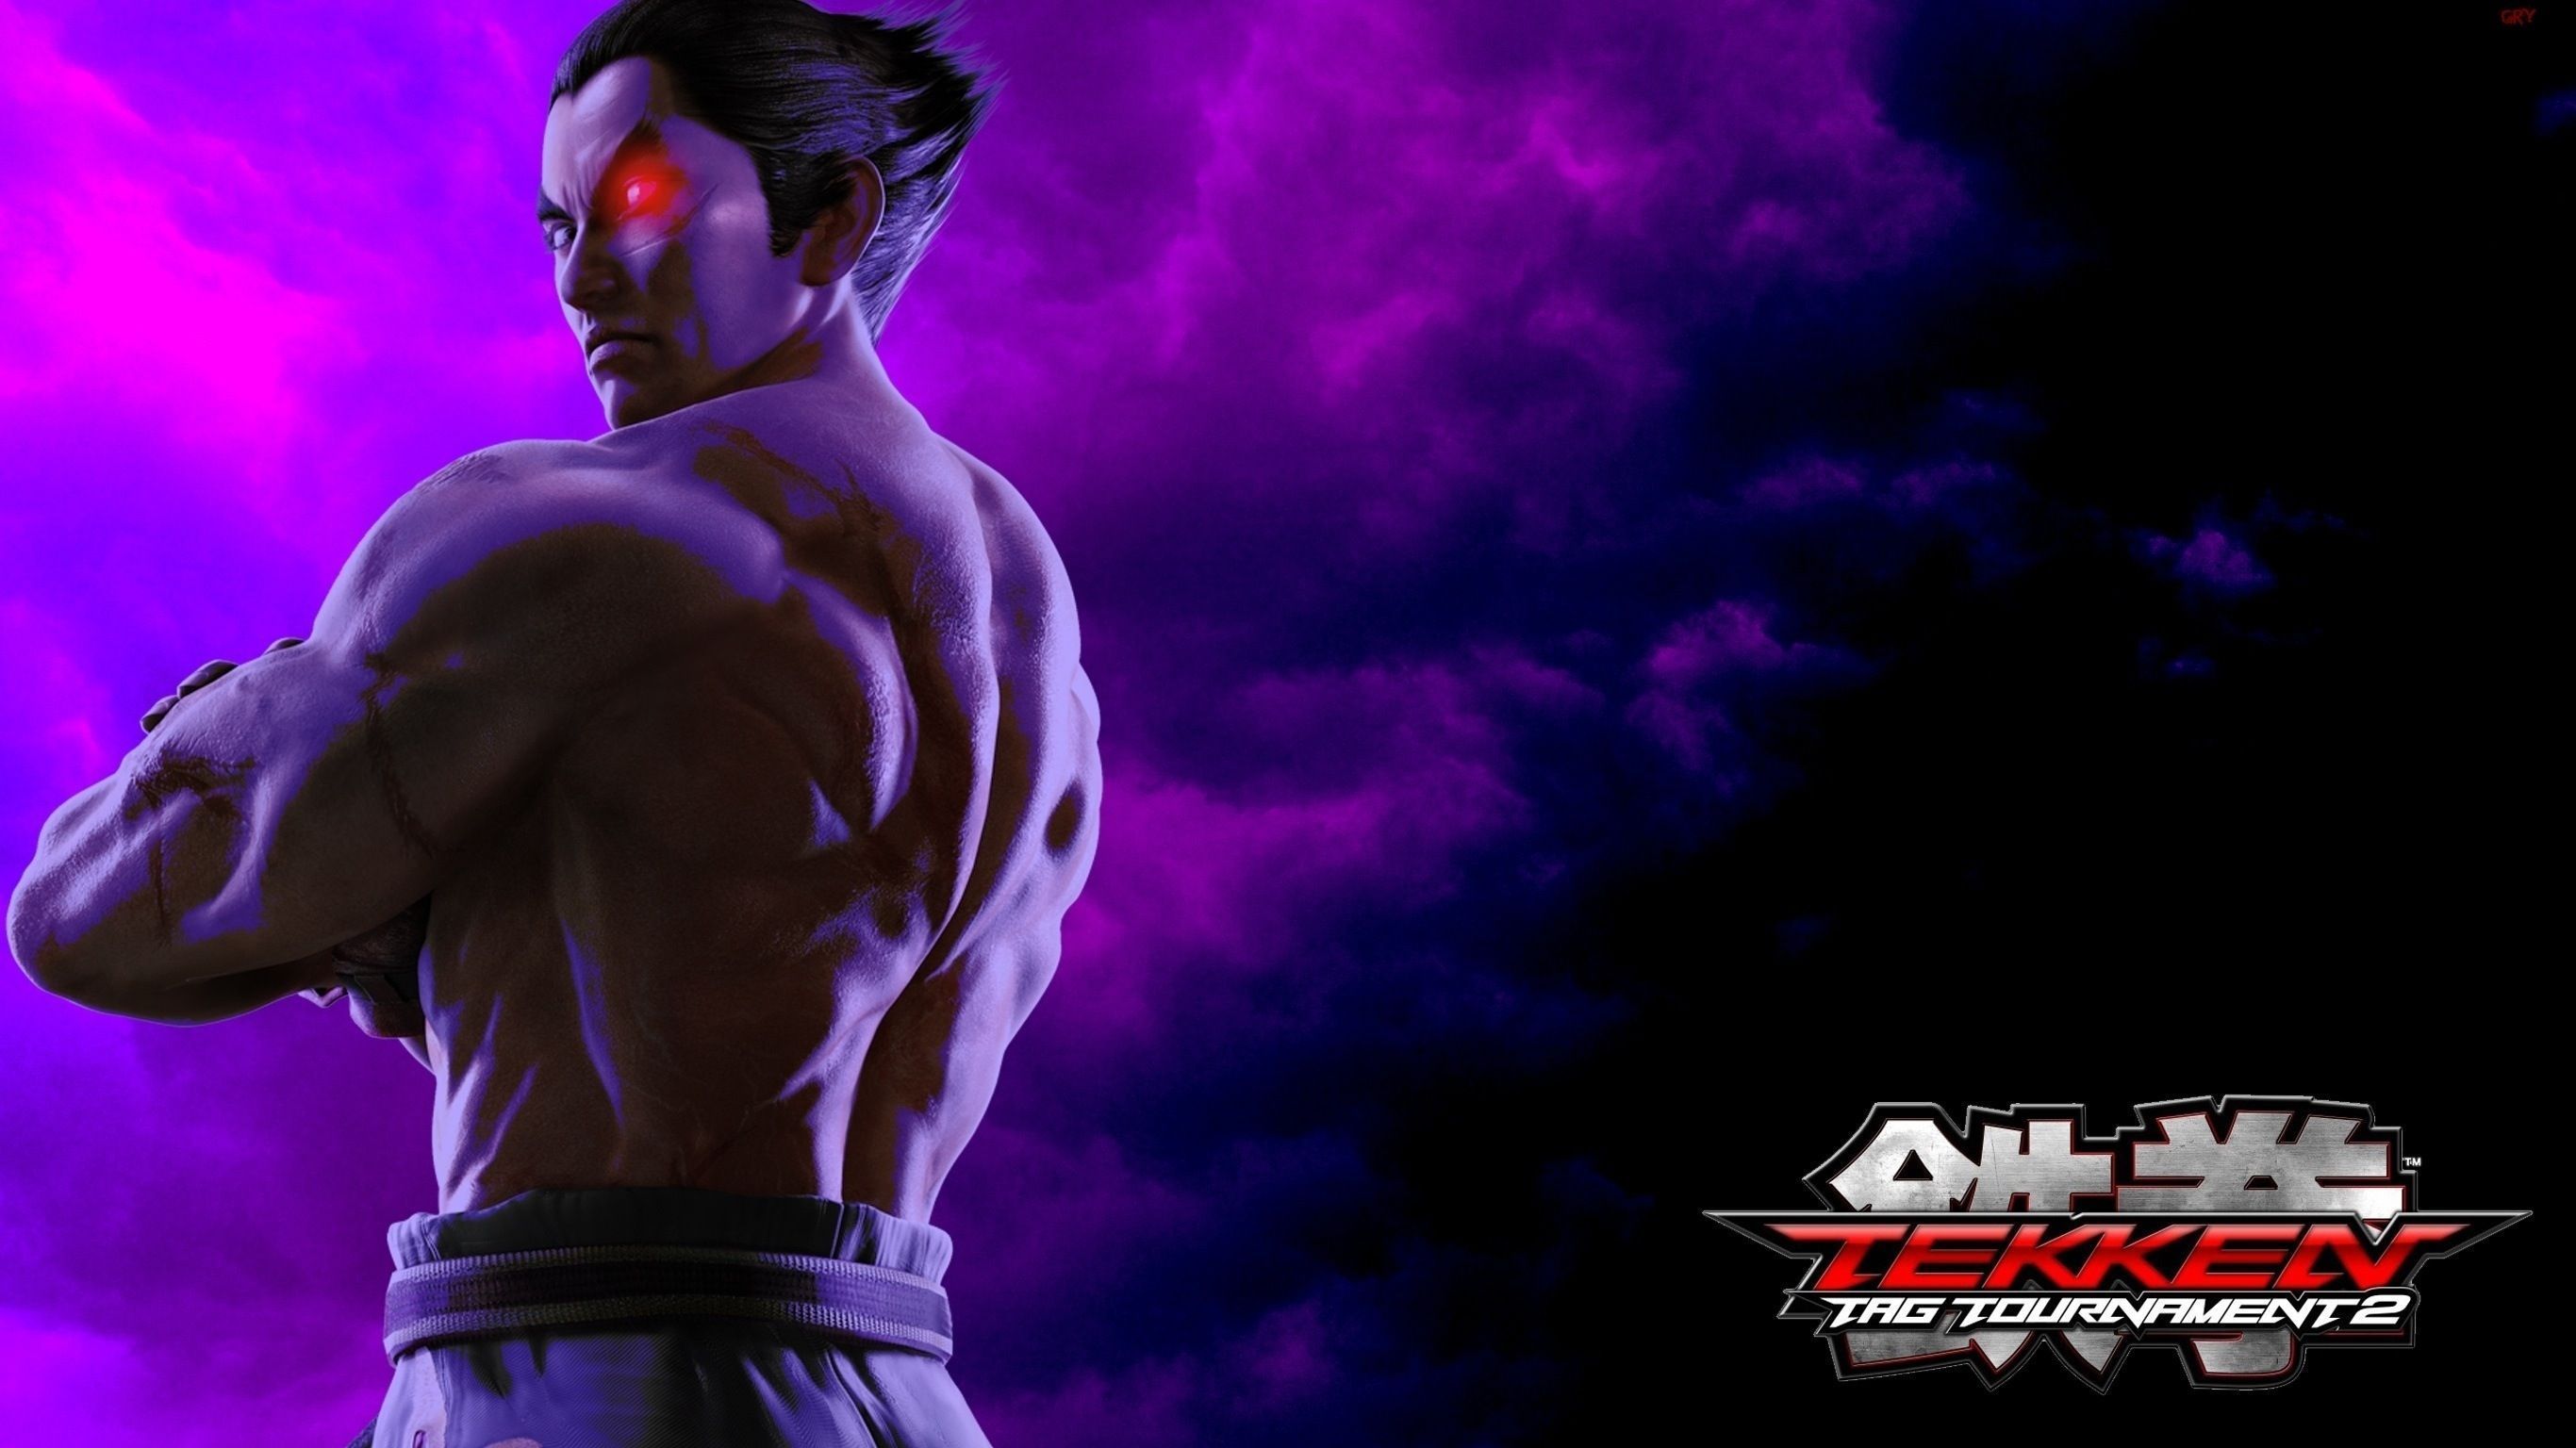 Devil Kazuya HD Wallpapers and Backgrounds